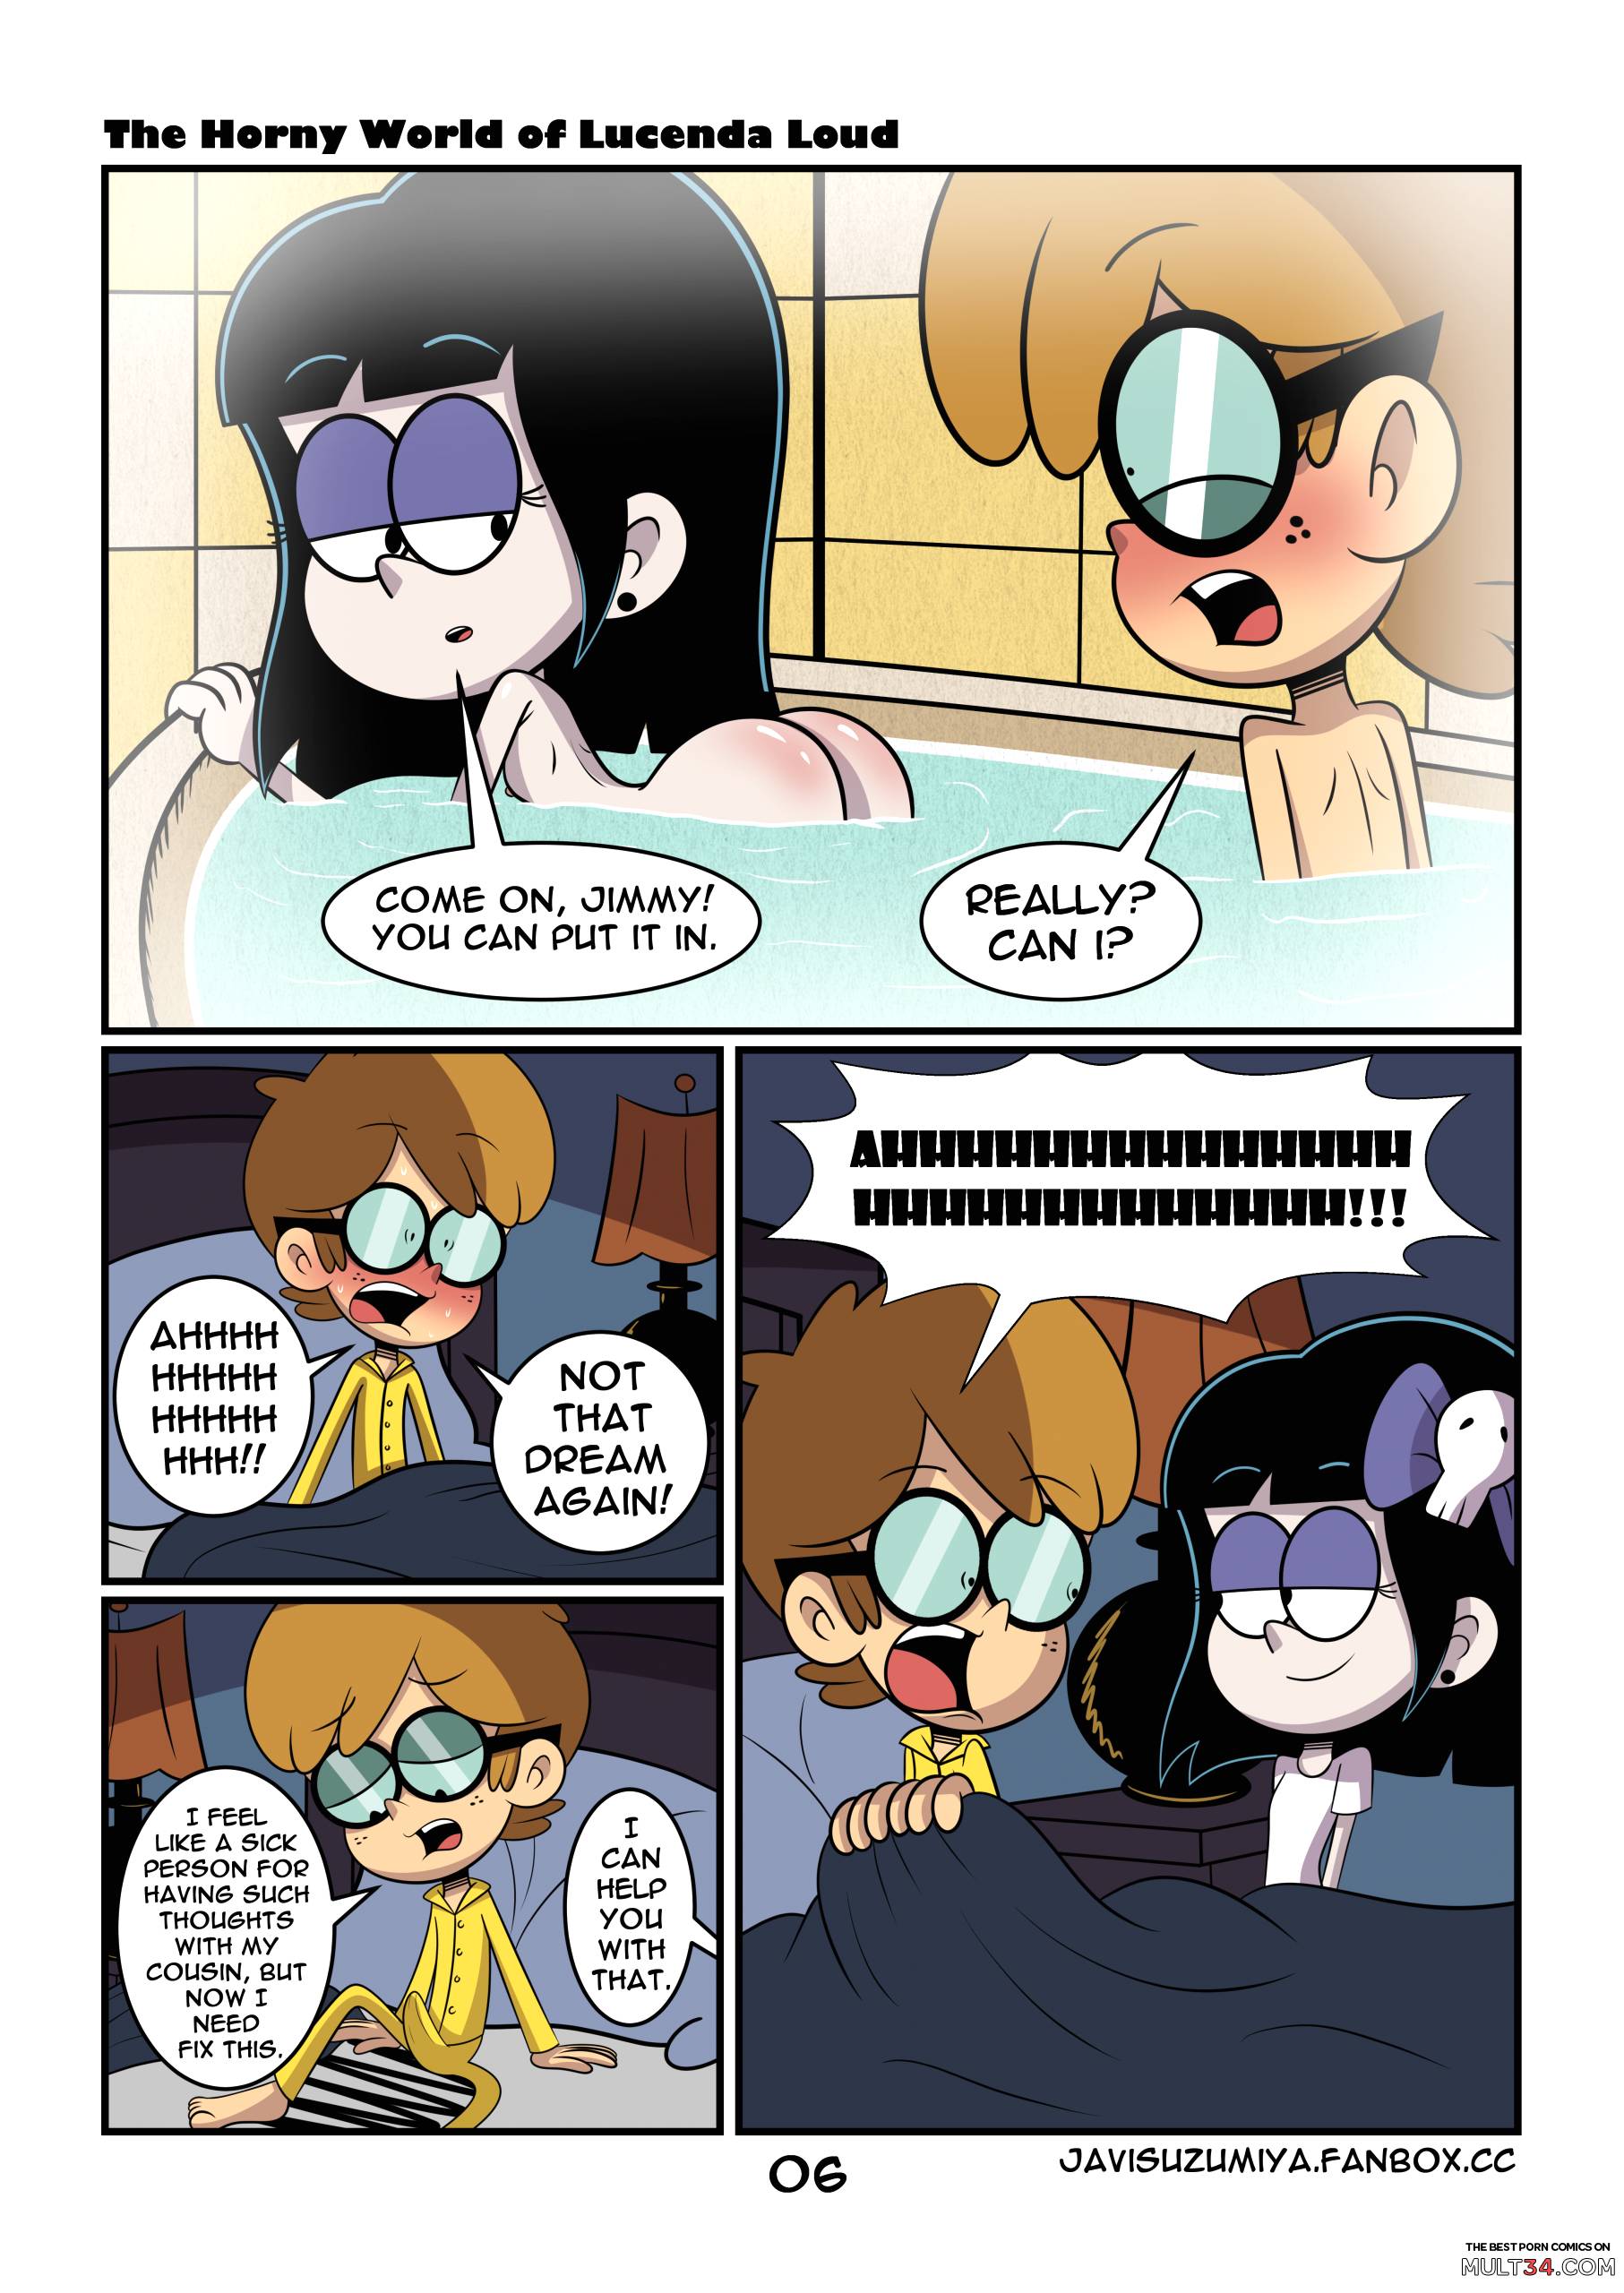 The Horny World of Lucenda Loud page 6